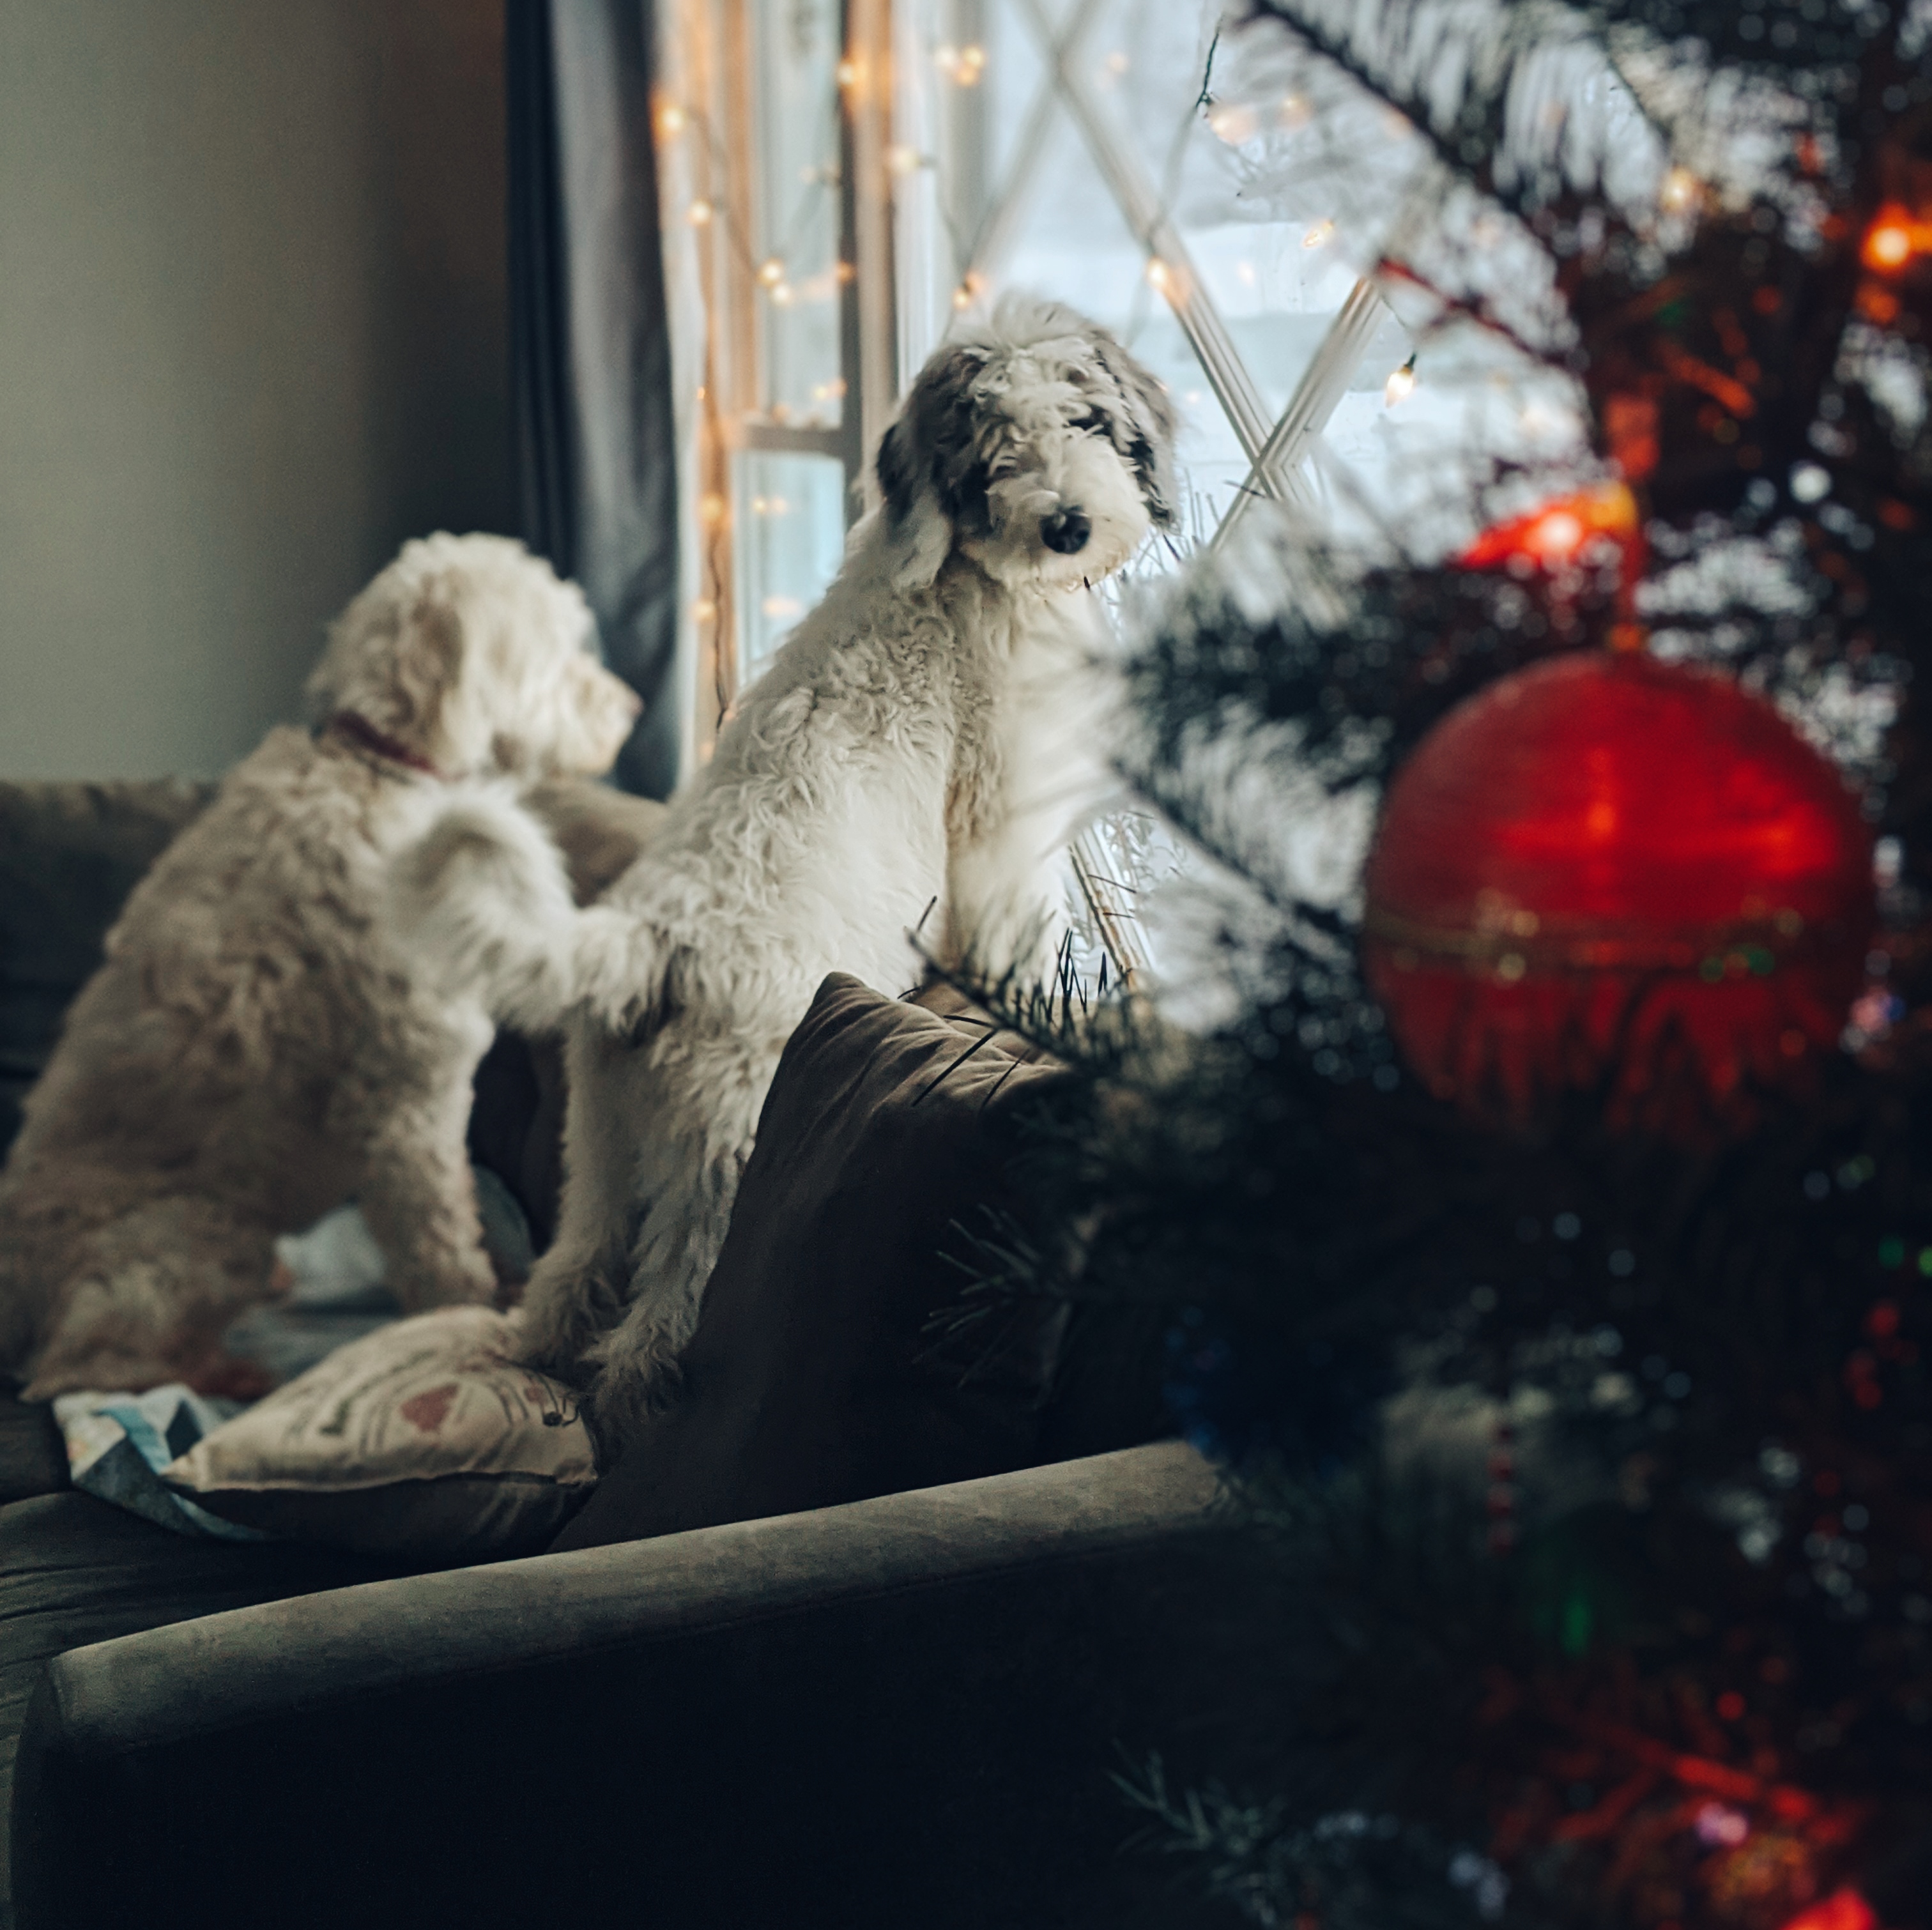 dogs looking out of window, xmas tree in foreground